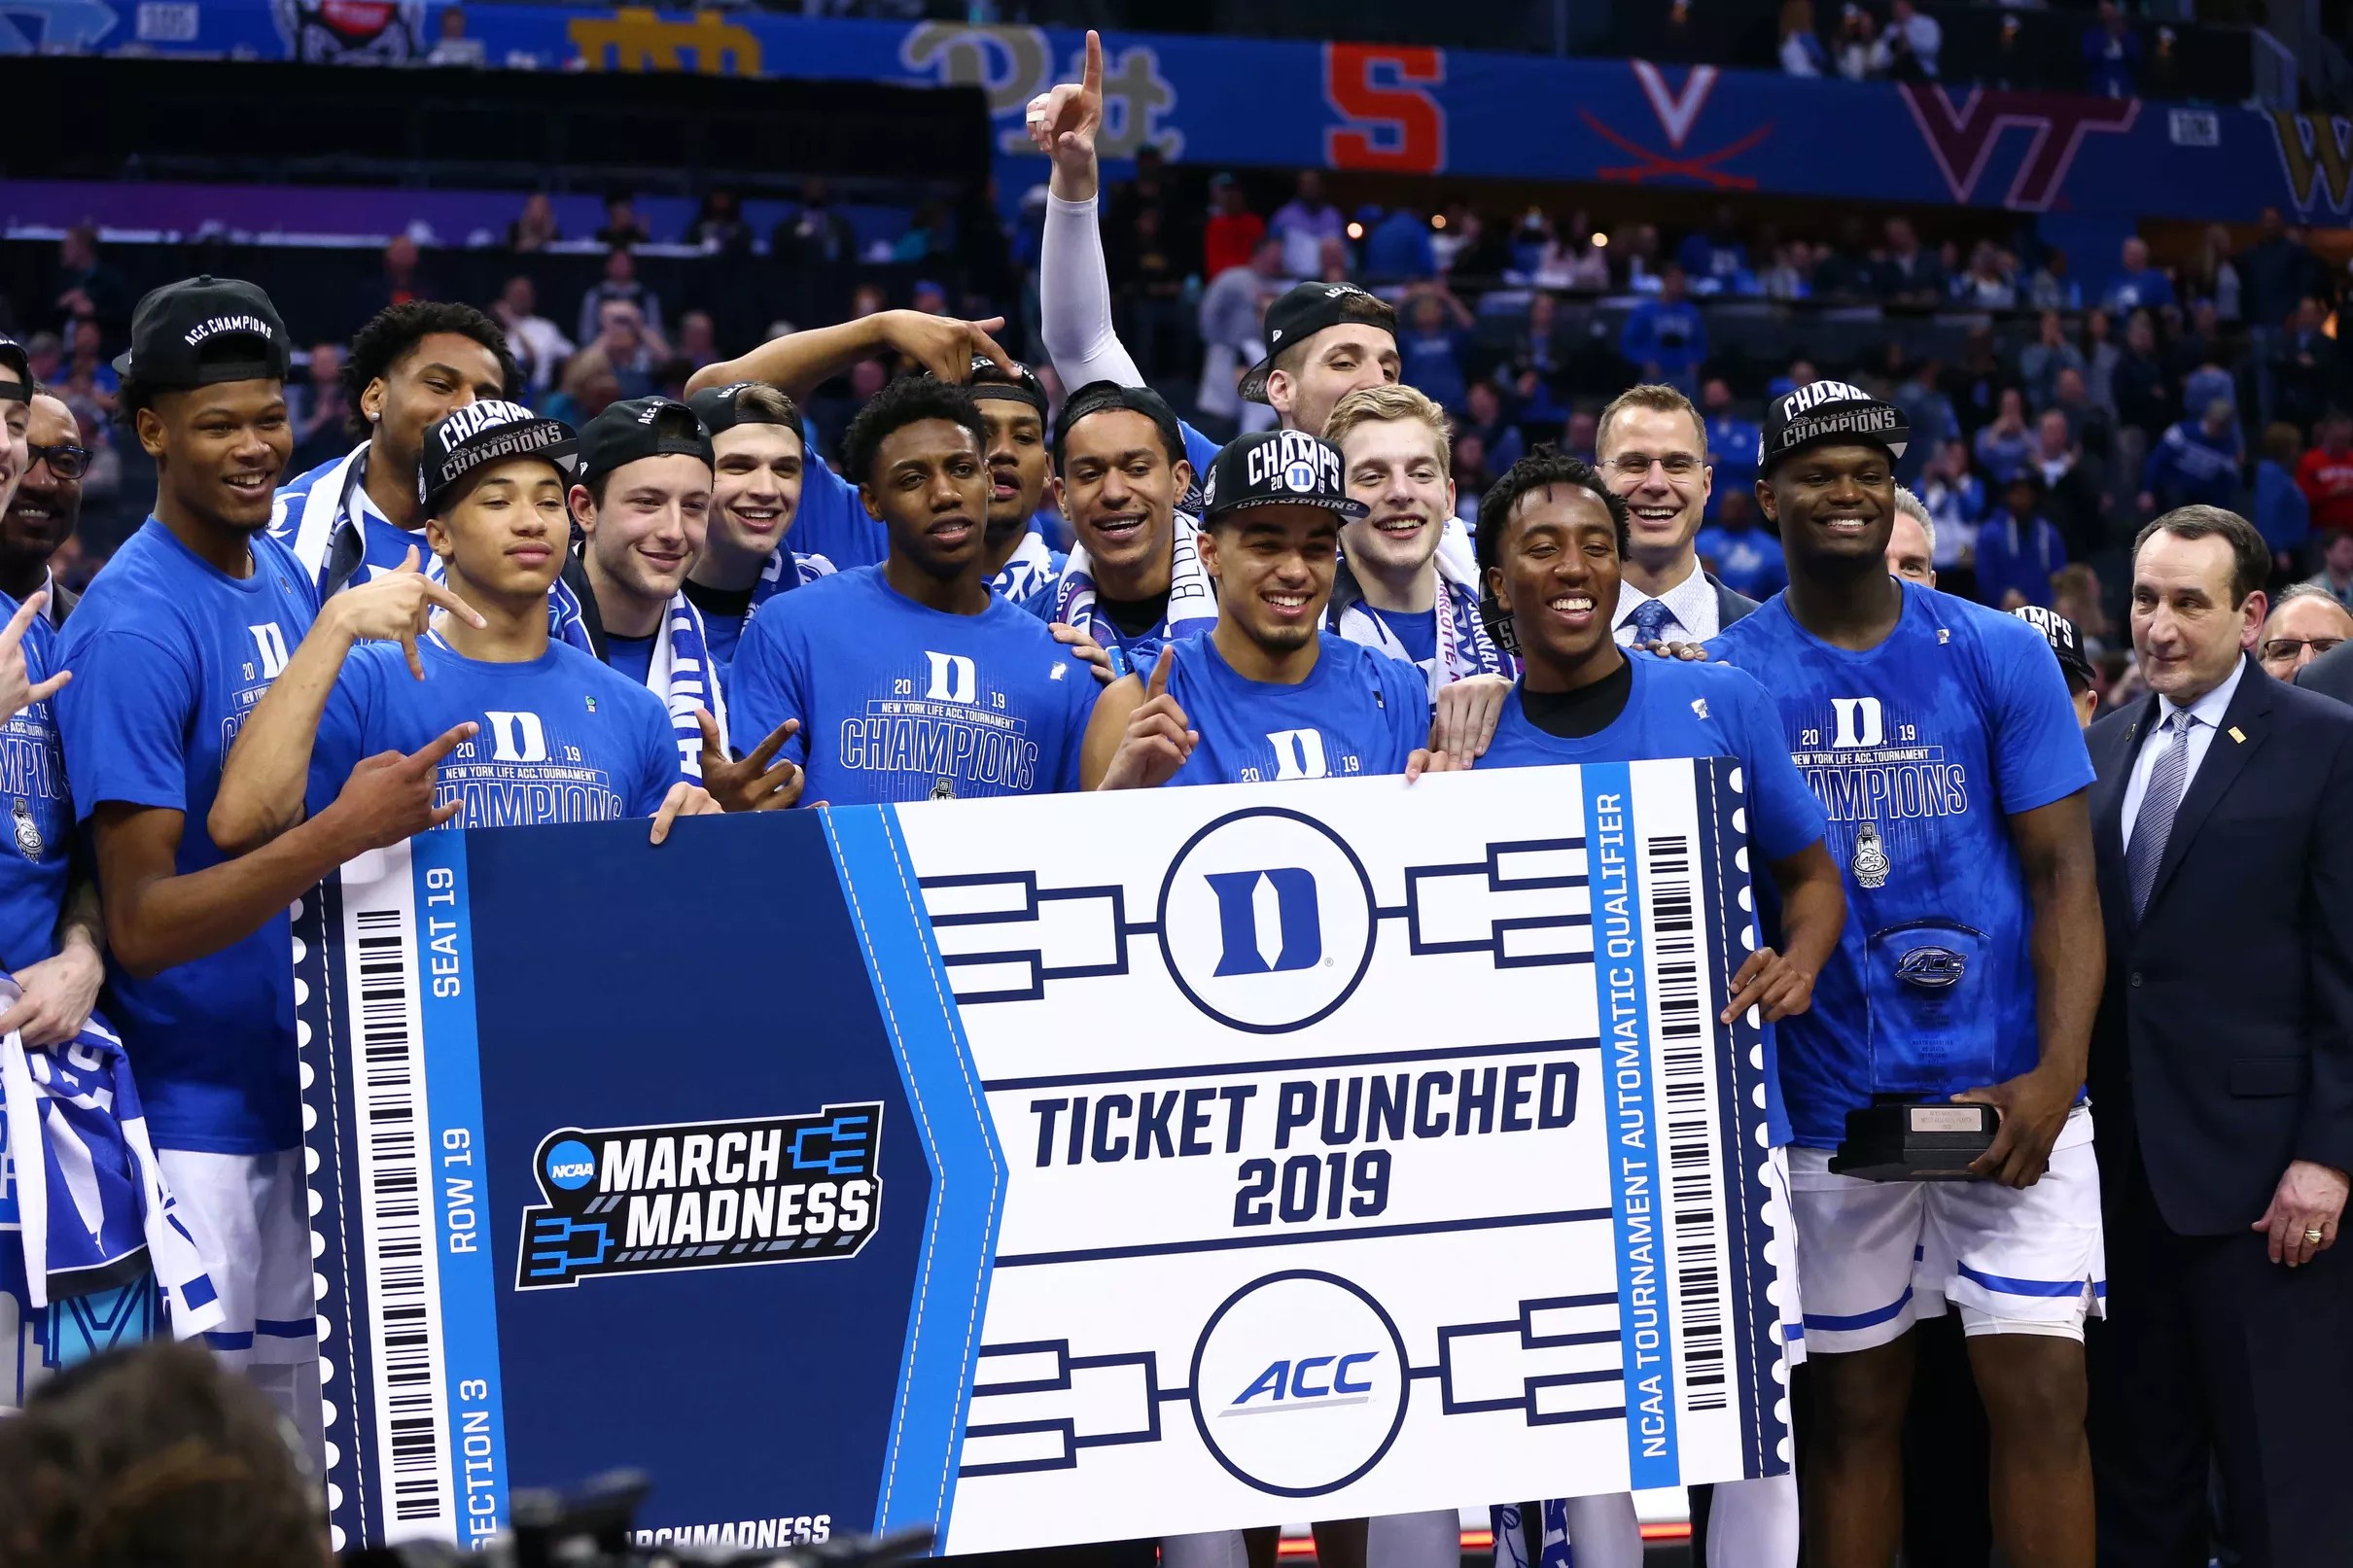 DBR Episode 153 Duke Wins The ACC Title, Secures Overall 1 Seed